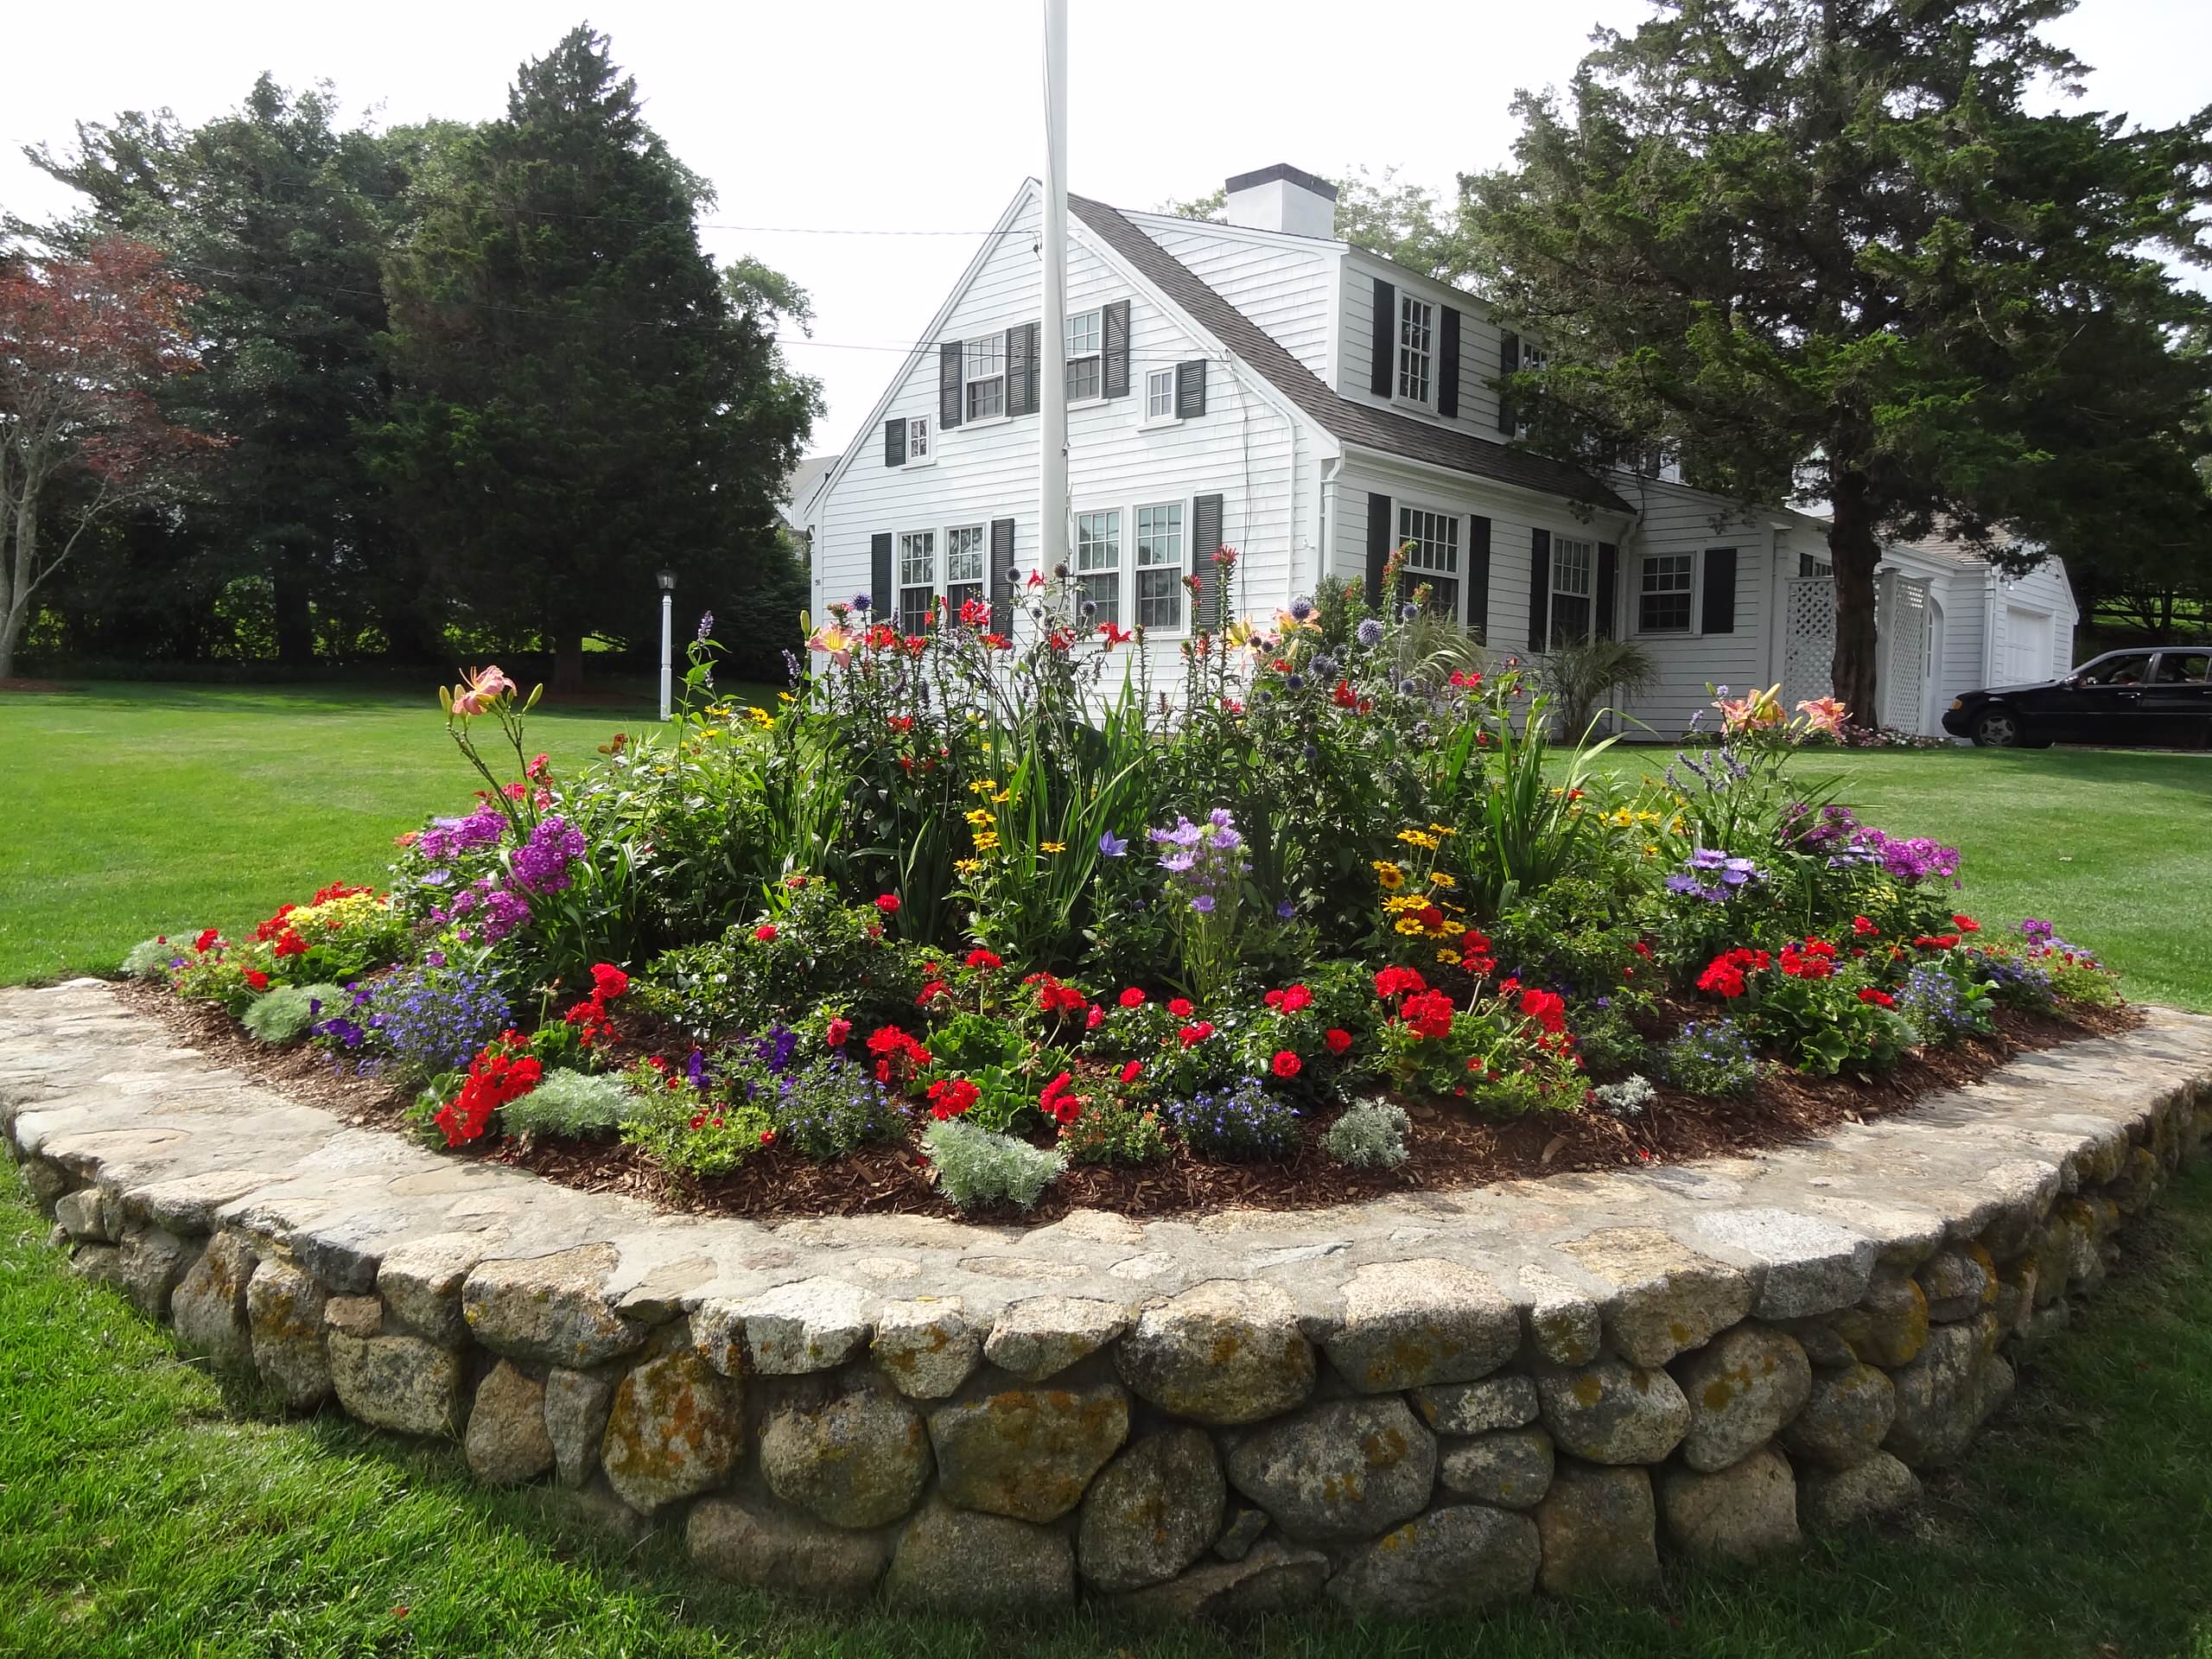 Flagpole Landscaping Houzz, Landscaping Around Flagpole Pictures